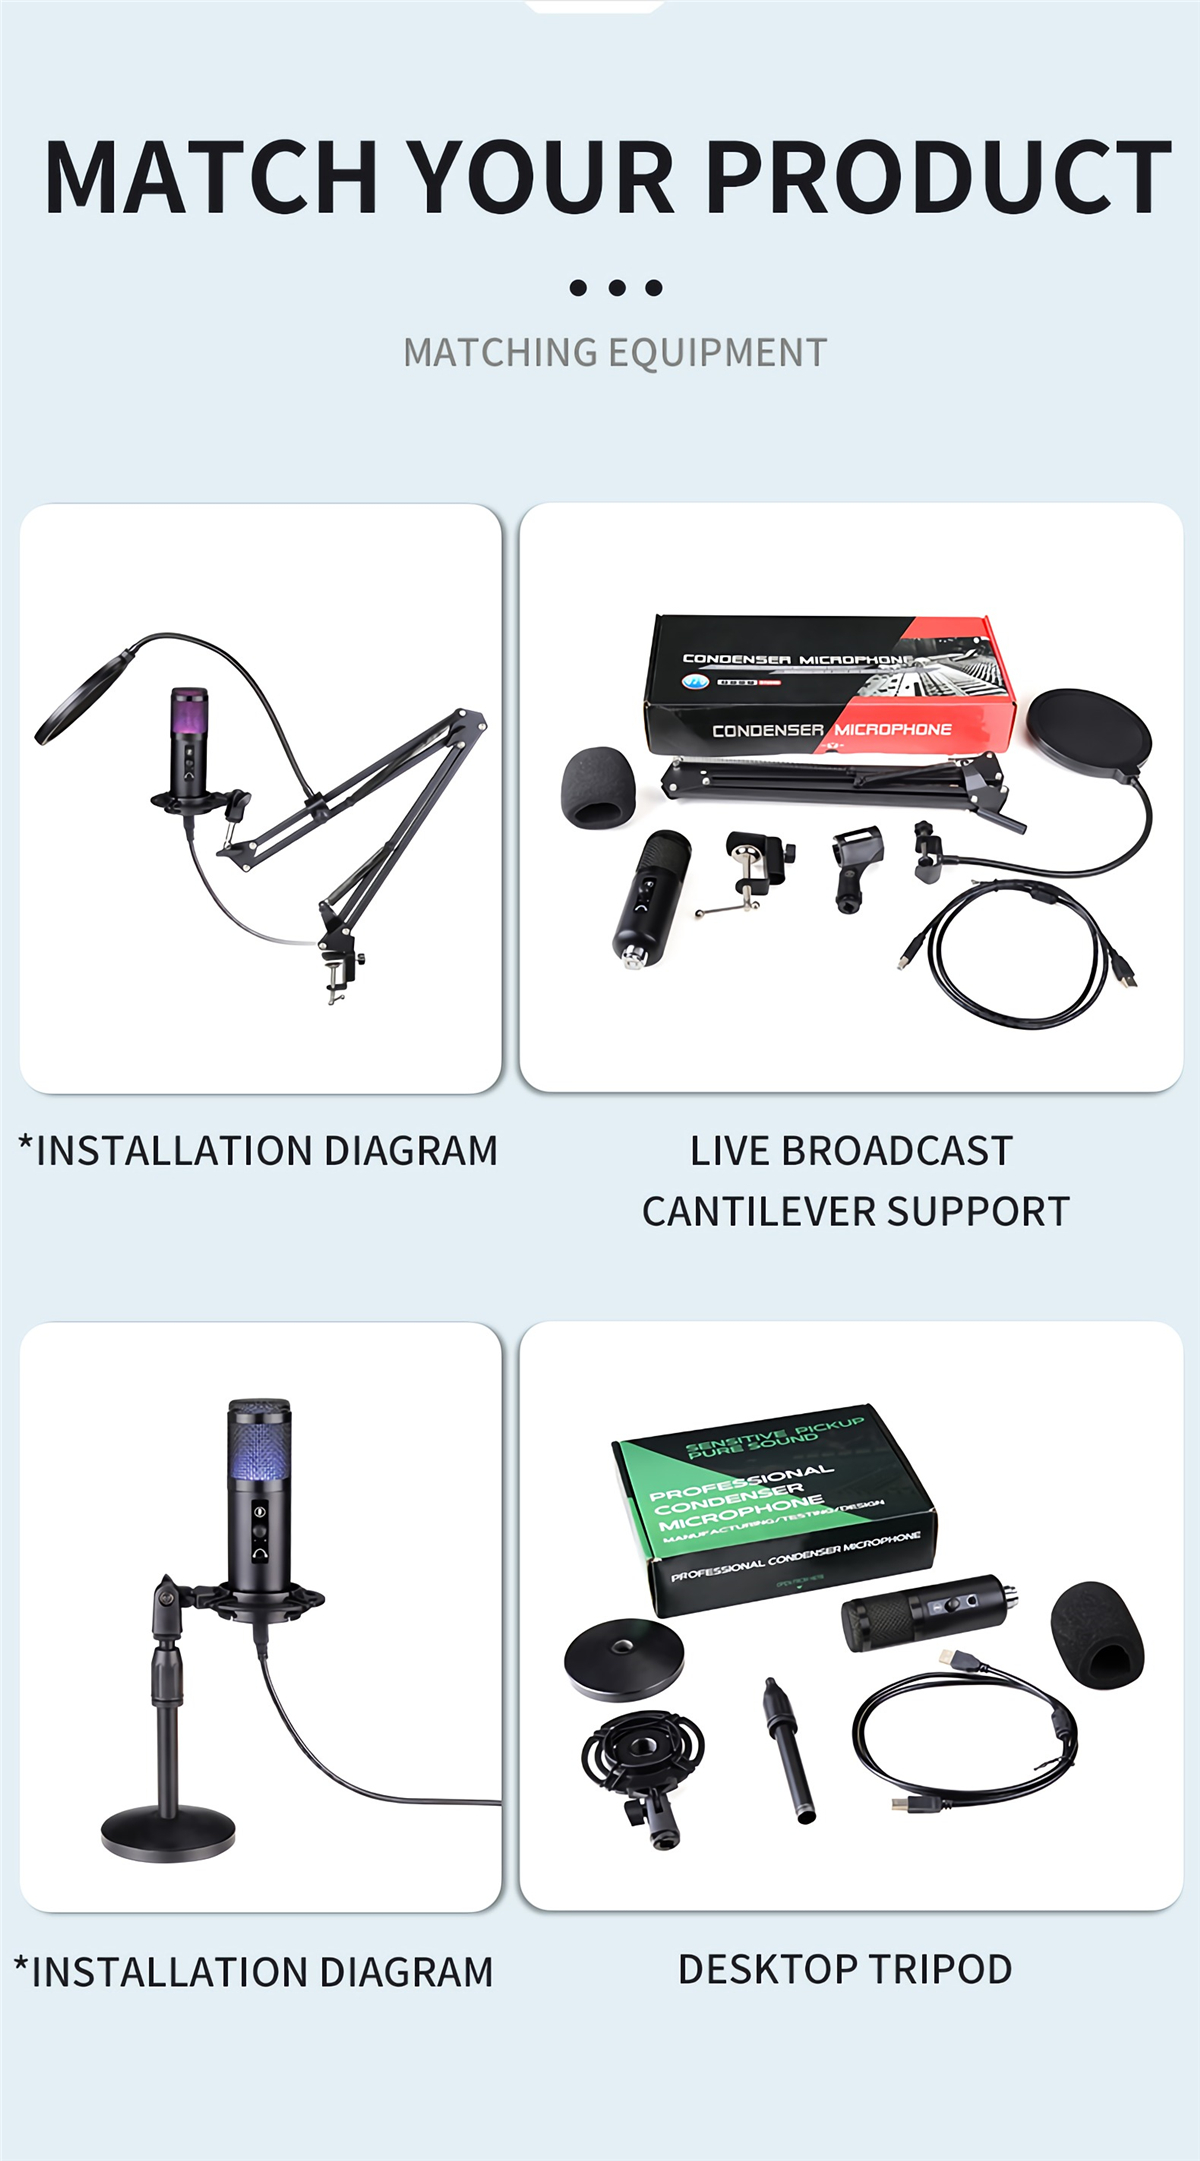 CEOK-K04-Condenser-Microphone-Kit-USB-Wired-Cardioid-directional-RGB-Dynamic-Light-Audio-Sound-Recor-1899444-15